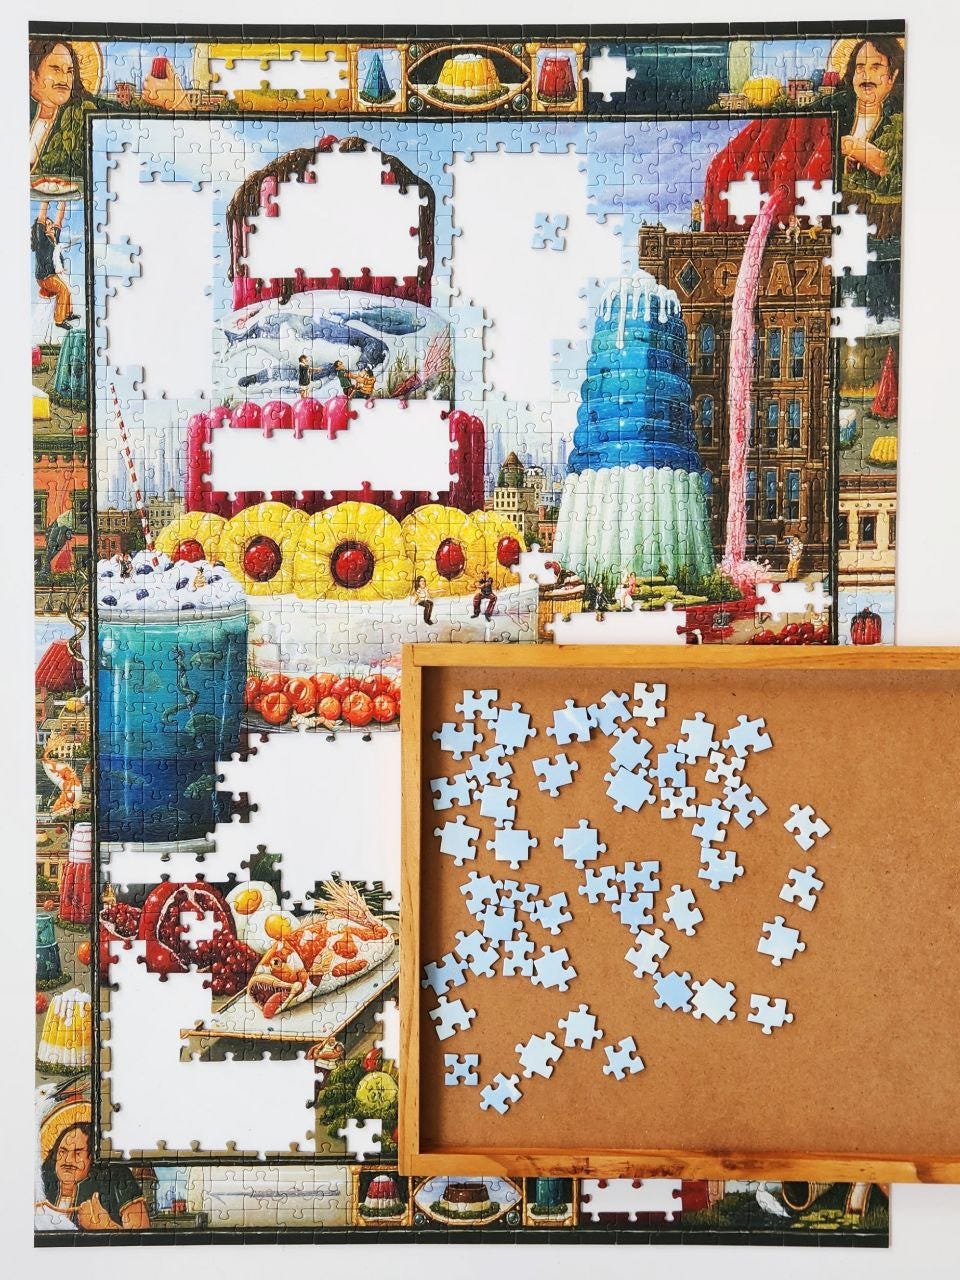 Bits and Pieces - 1500 Piece Puzzle Caddy-Porta-Puzzle Jigsaw Caddy - Puzzle Accessory Puzzle Table